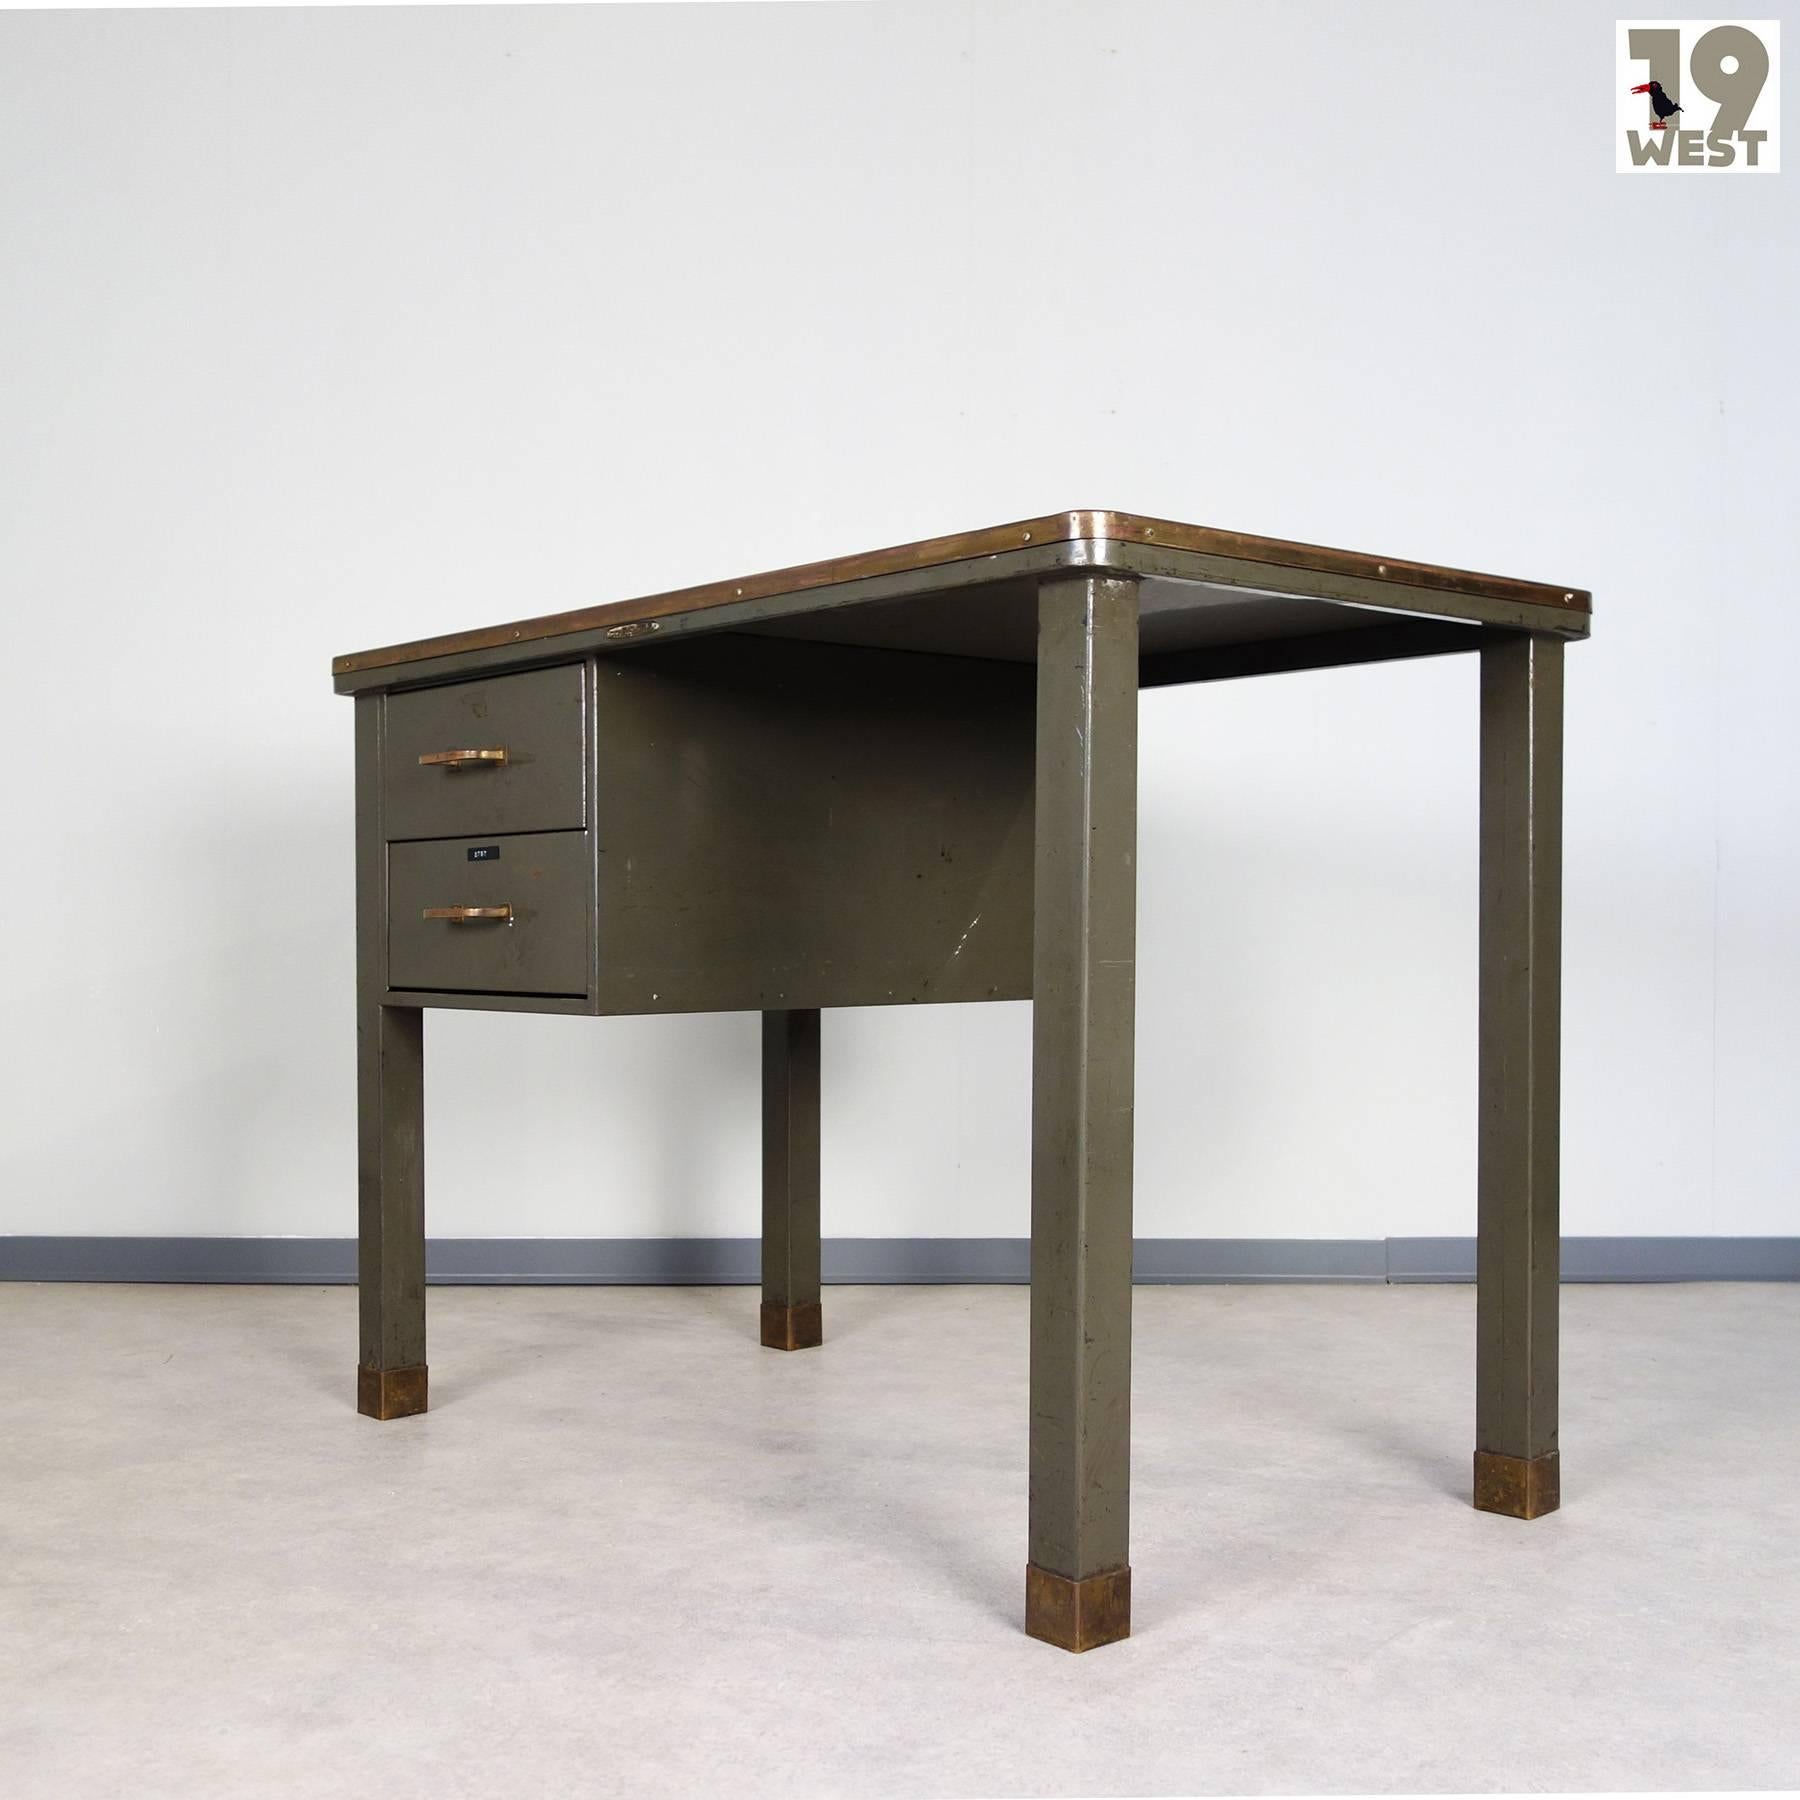 Beautiful writing desk, manufactured in the 1940s in Belgium by Ribeauville Demolder Brussels. The desk consists of green-grey painted sheet steel with several brass details and a linoleum top. It is in a good condition with a lot of great patina.